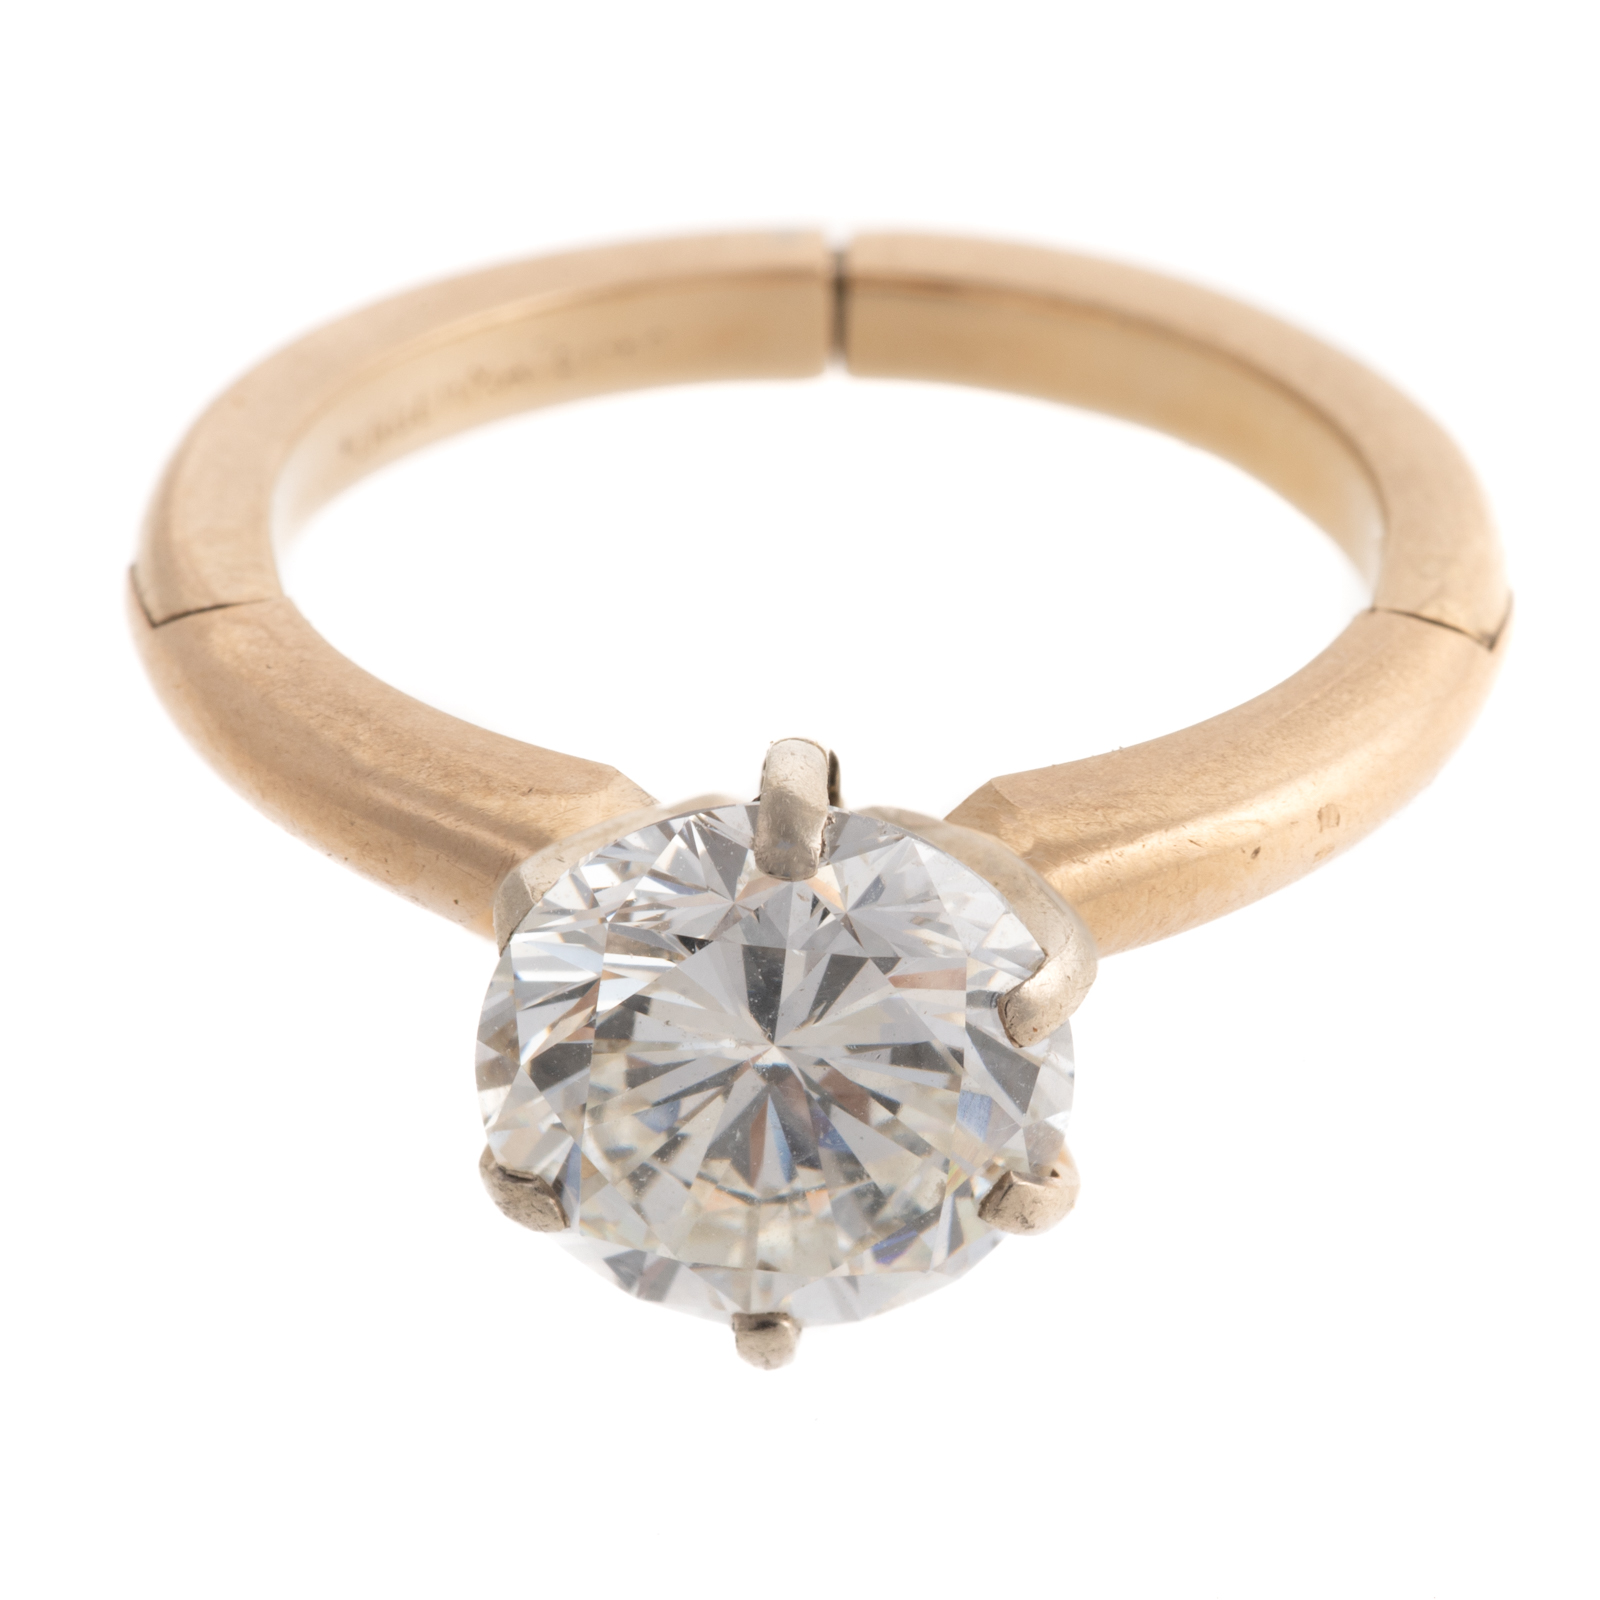 A 2.52 CT SOLITAIRE DIAMOND RING